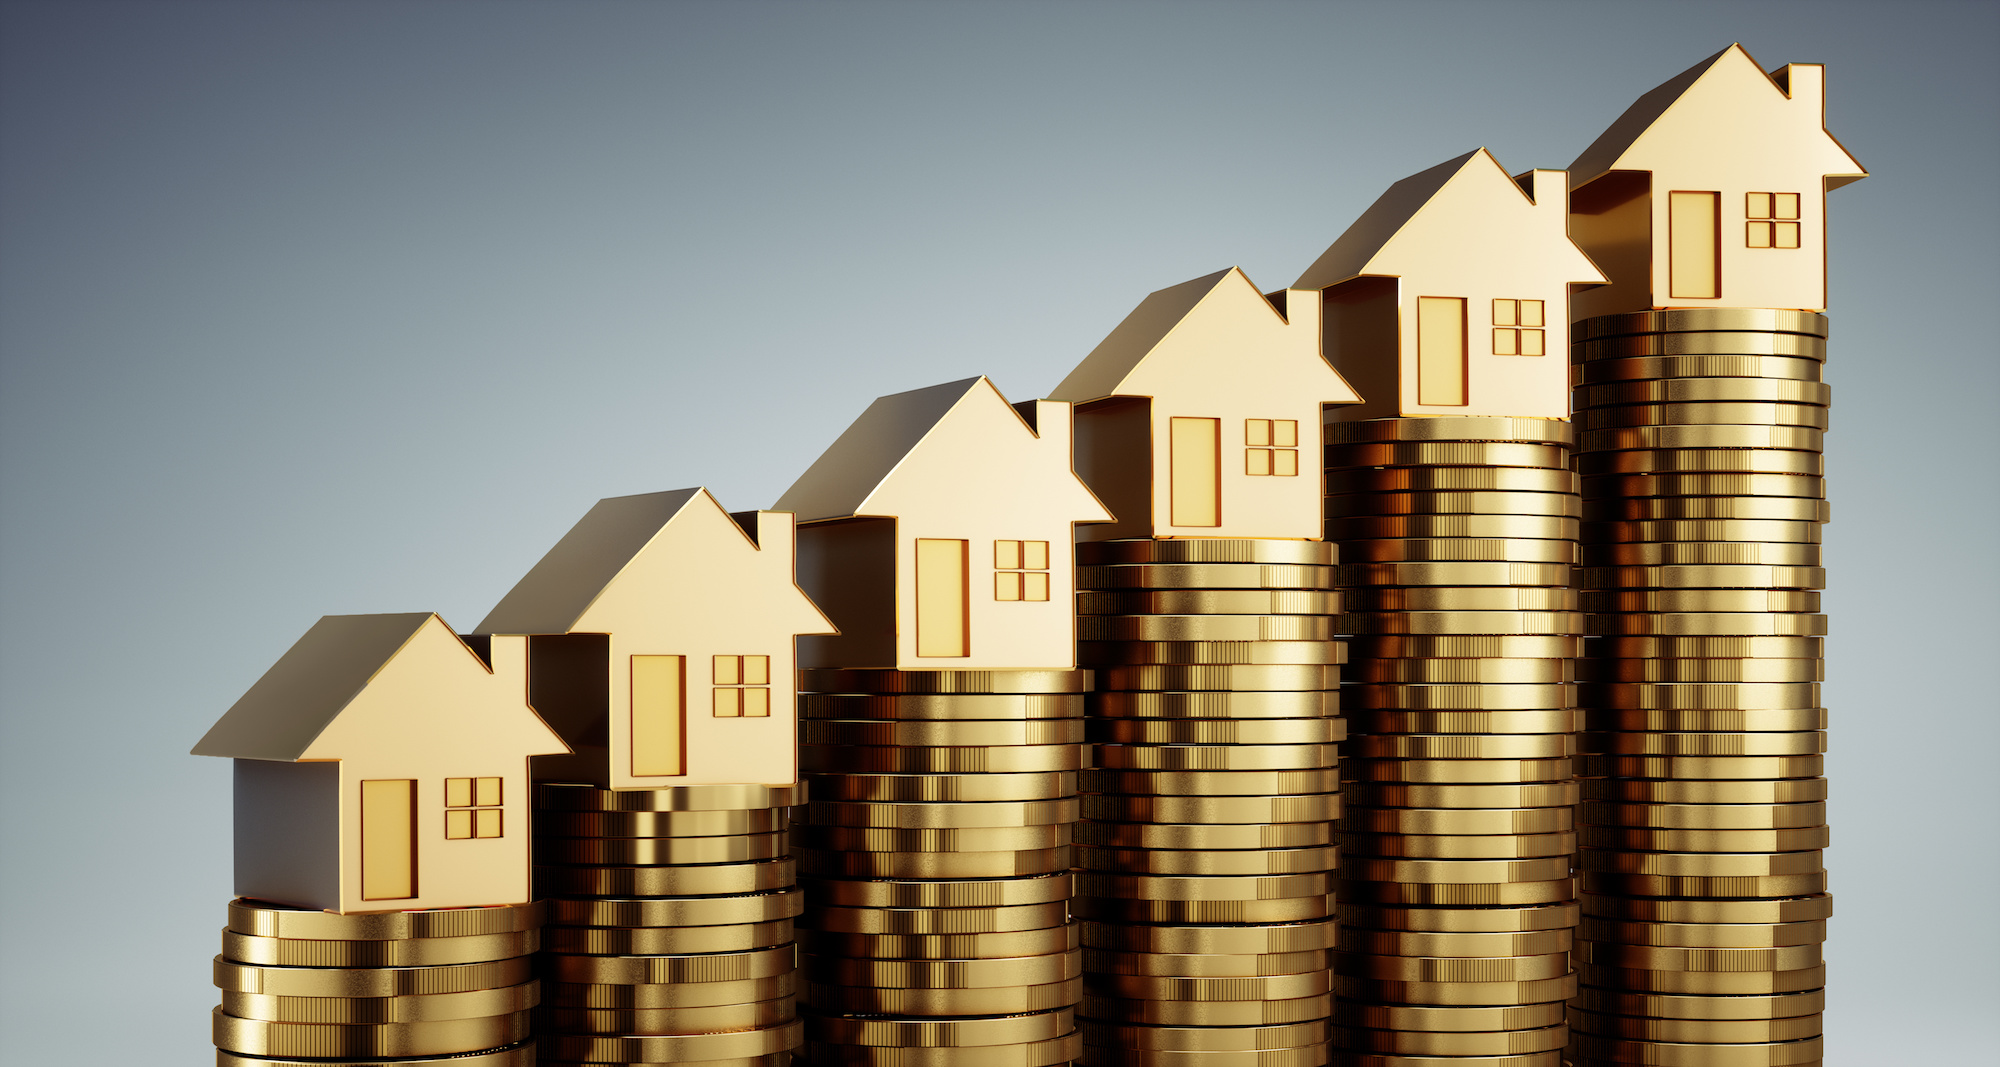 Miniature gold houses sit on stacks of gold coins. 